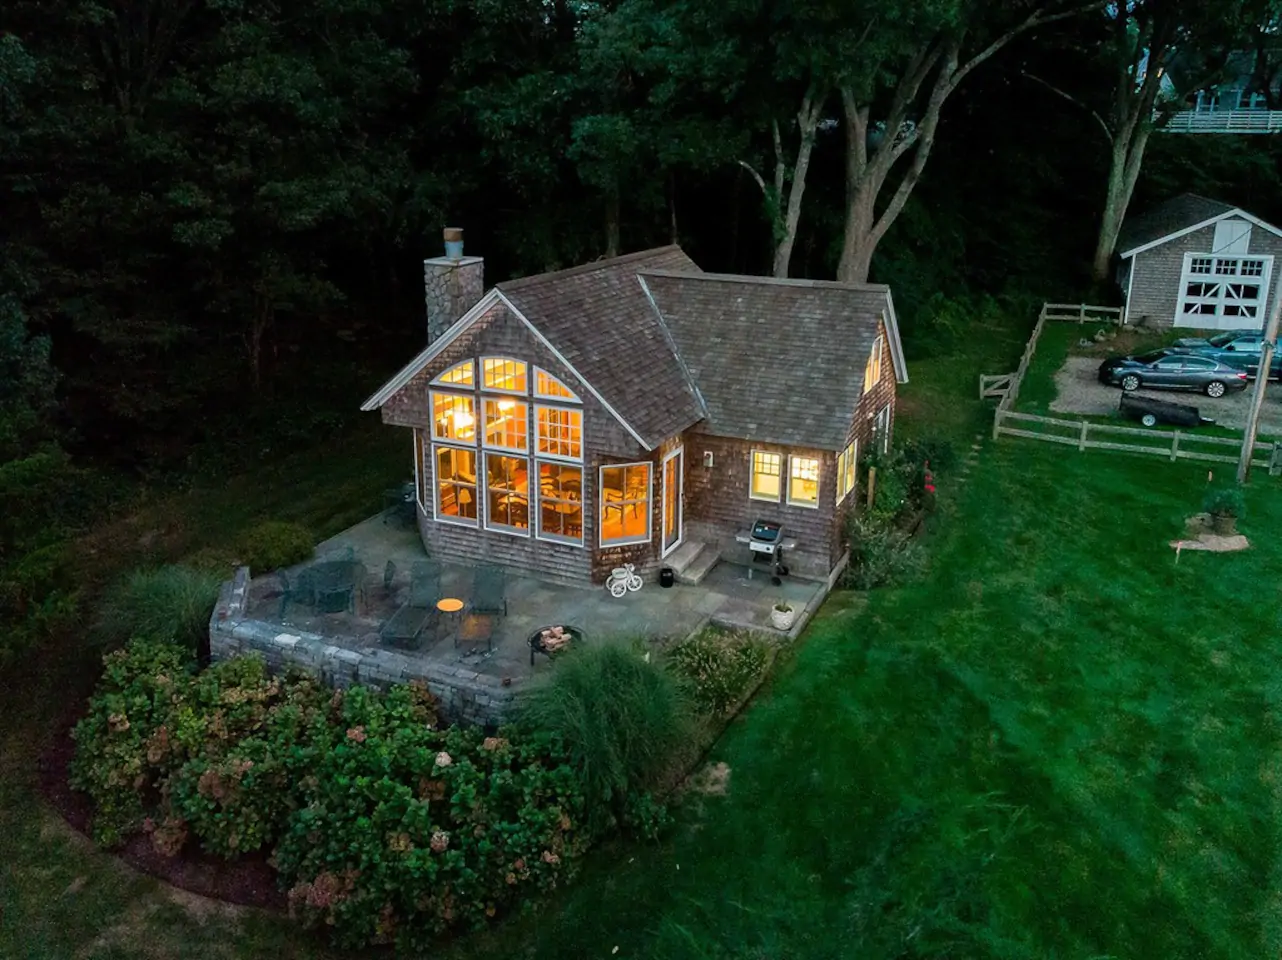 Classic New England style home is lit up in the evening with big windows that showcase a living room. The home is surrounded by greenery and trees.